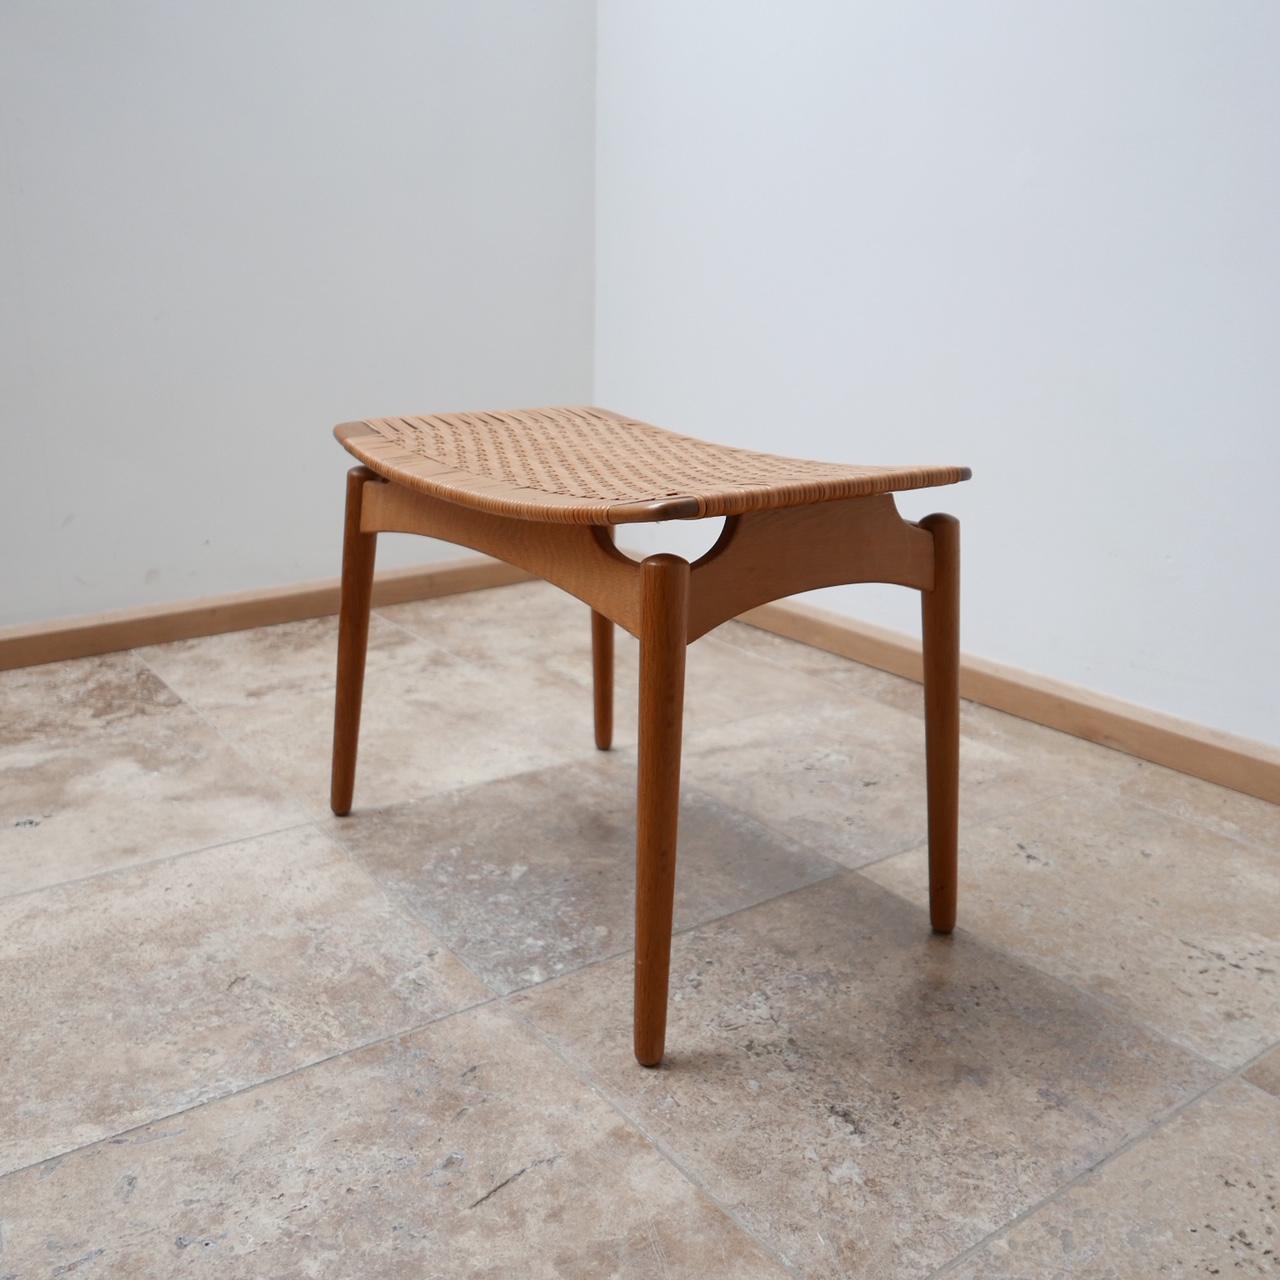 A stylish midcentury stool by Sigred Omann, designed for Ølholm Møbelfabrik.

Denmark, circa 1950s.

Cane top, the base is either oak or a light teak.

Amazing stance and form.

Perfect as an occasional stool or a side table for books and